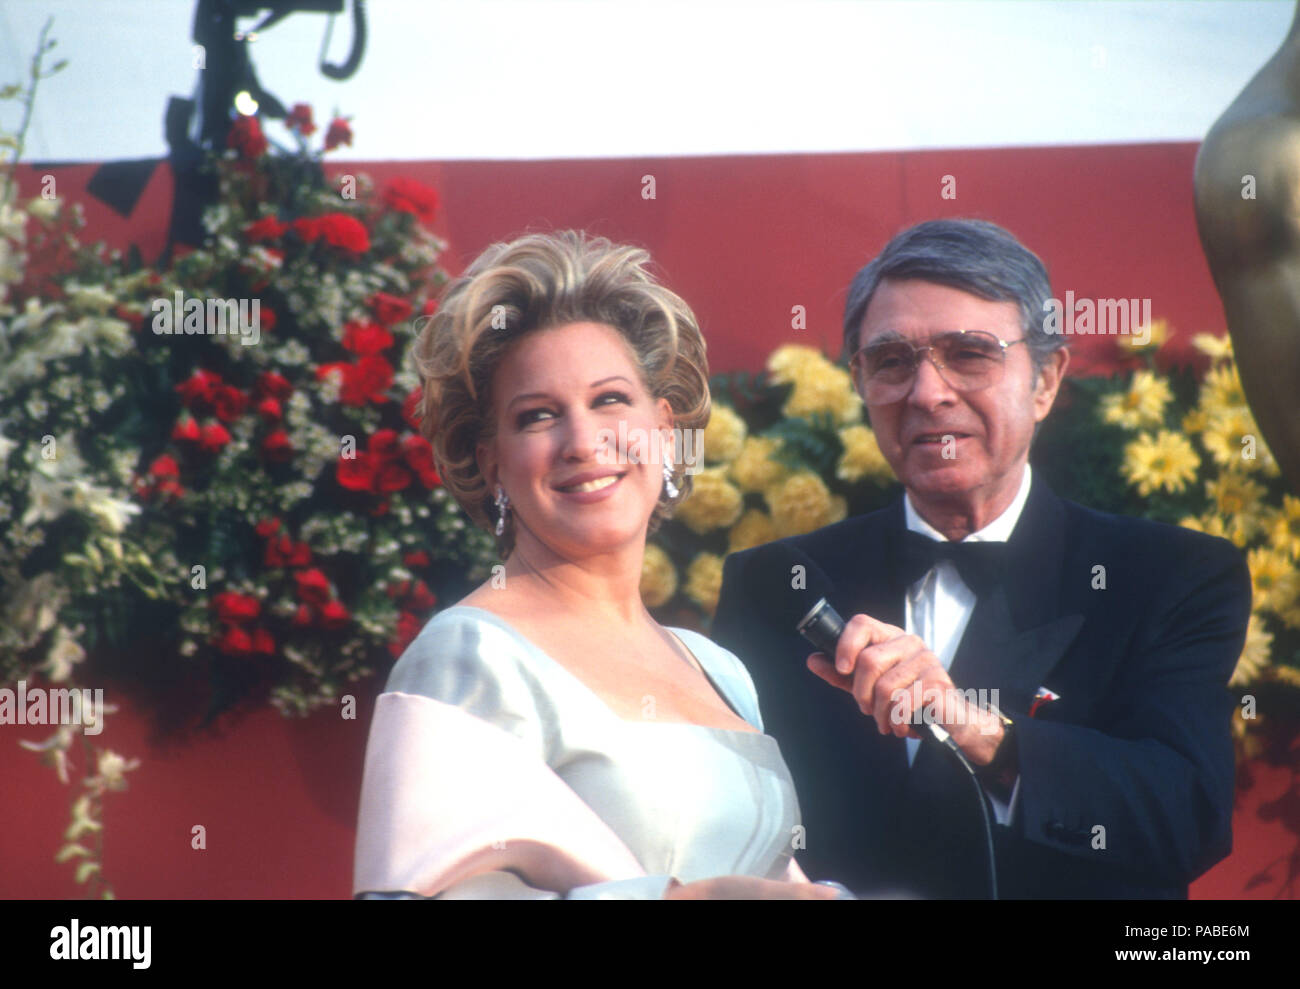 LOS ANGELES, CA - MARCH 30: Singer Bette Midler ad Army Archerd attend the 64th Annual Academy Awards on March 30, 1992 at the Dorothy Chandler Pavilion in Los Angeles, California. Photo by Barry King/Alamy Stock Photo Stock Photo